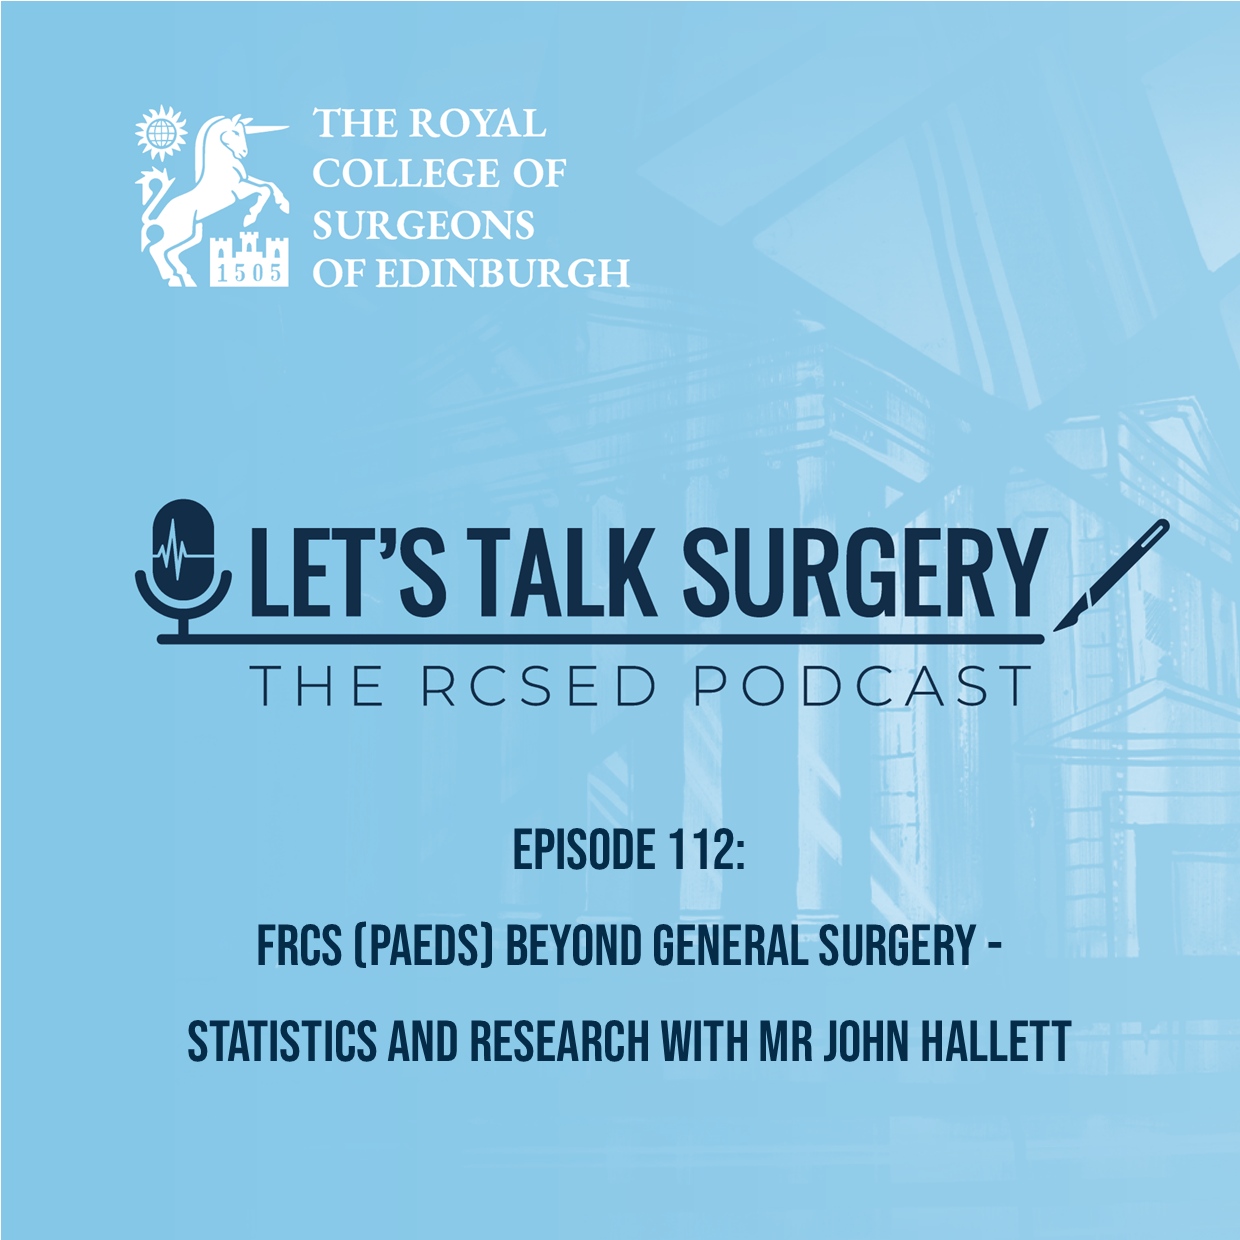 FRCS (Paeds) Beyond General Surgery - Statistics and Research with Mr John Hallett